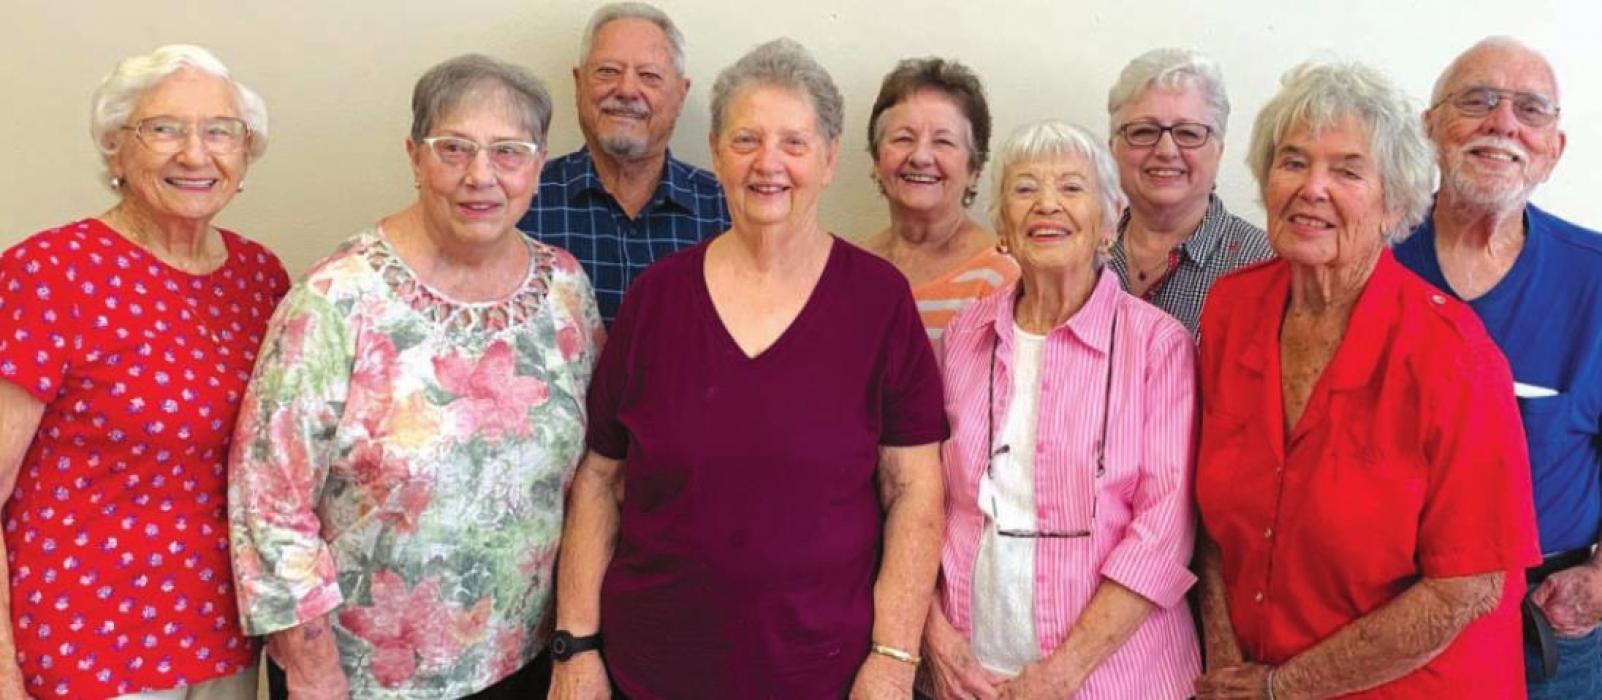 The La Grange Senior Citizens Group pictured are front from left: Mannie Fritsch-Schmid, Marianne Williams, Audrey Huenefeld, Joan Rice and Marie Hensel. Back row, left to right: Glenn Altwein, Marilyn Strmiska, Judy Zuhn, and John Rice. Not pictured are board members Norma Adams, Myrna Altwein, Neale Rabensburg, and Gloria Raschke.